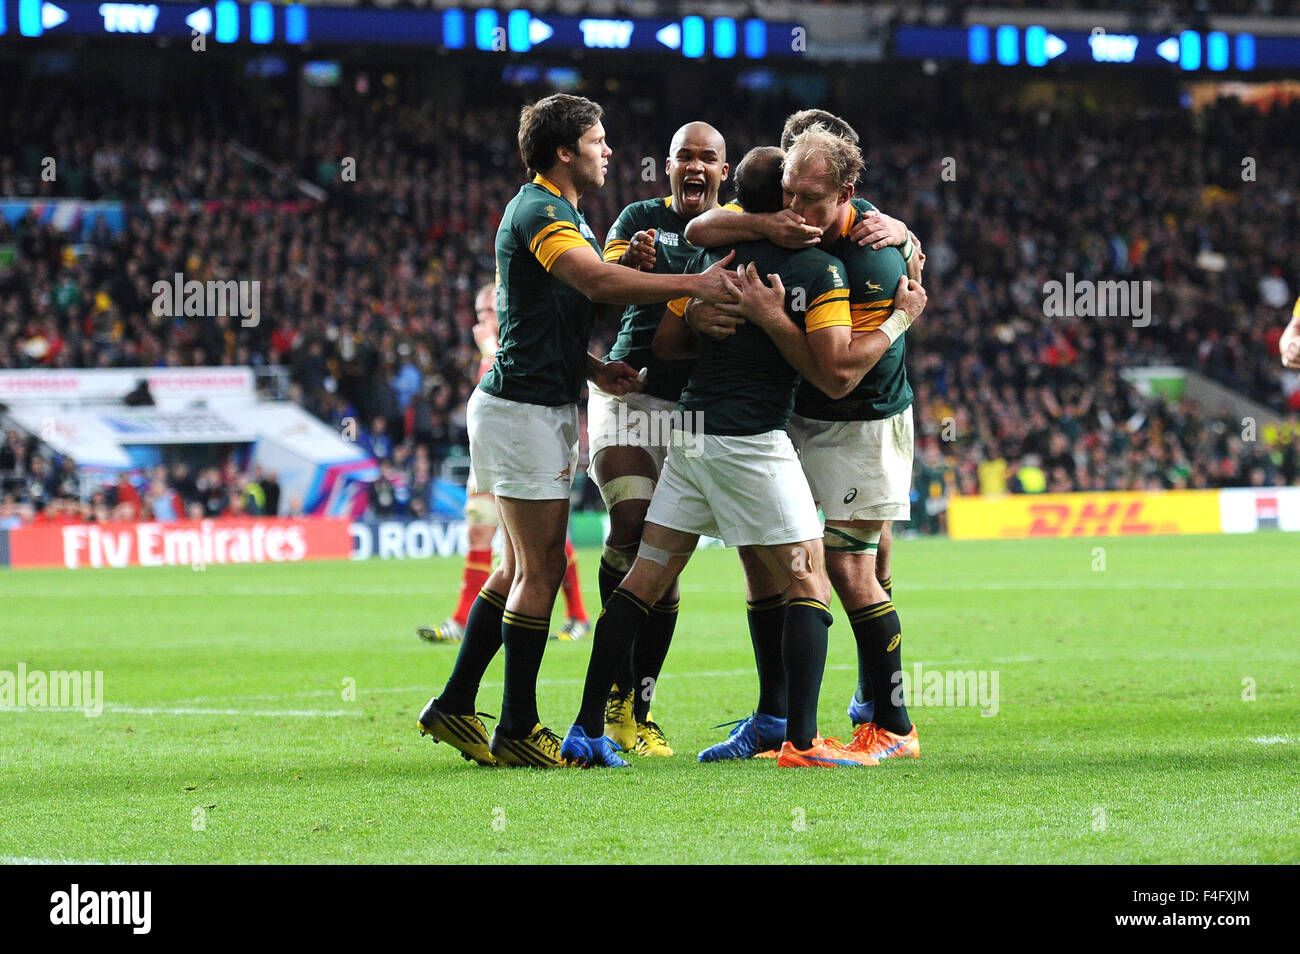 London, UK. 17 October 2015: Boks Captain Fourie du Preez of South Africa is swamped by teammates after scoring a try during the Quarter Final of the Rugby World Cup 2015 between South Africa and Wales - Twickenham Stadium, London.(Photo by: Rob Munro/Stewart Communications/CSM) Credit:  Cal Sport Media/Alamy Live News Stock Photo